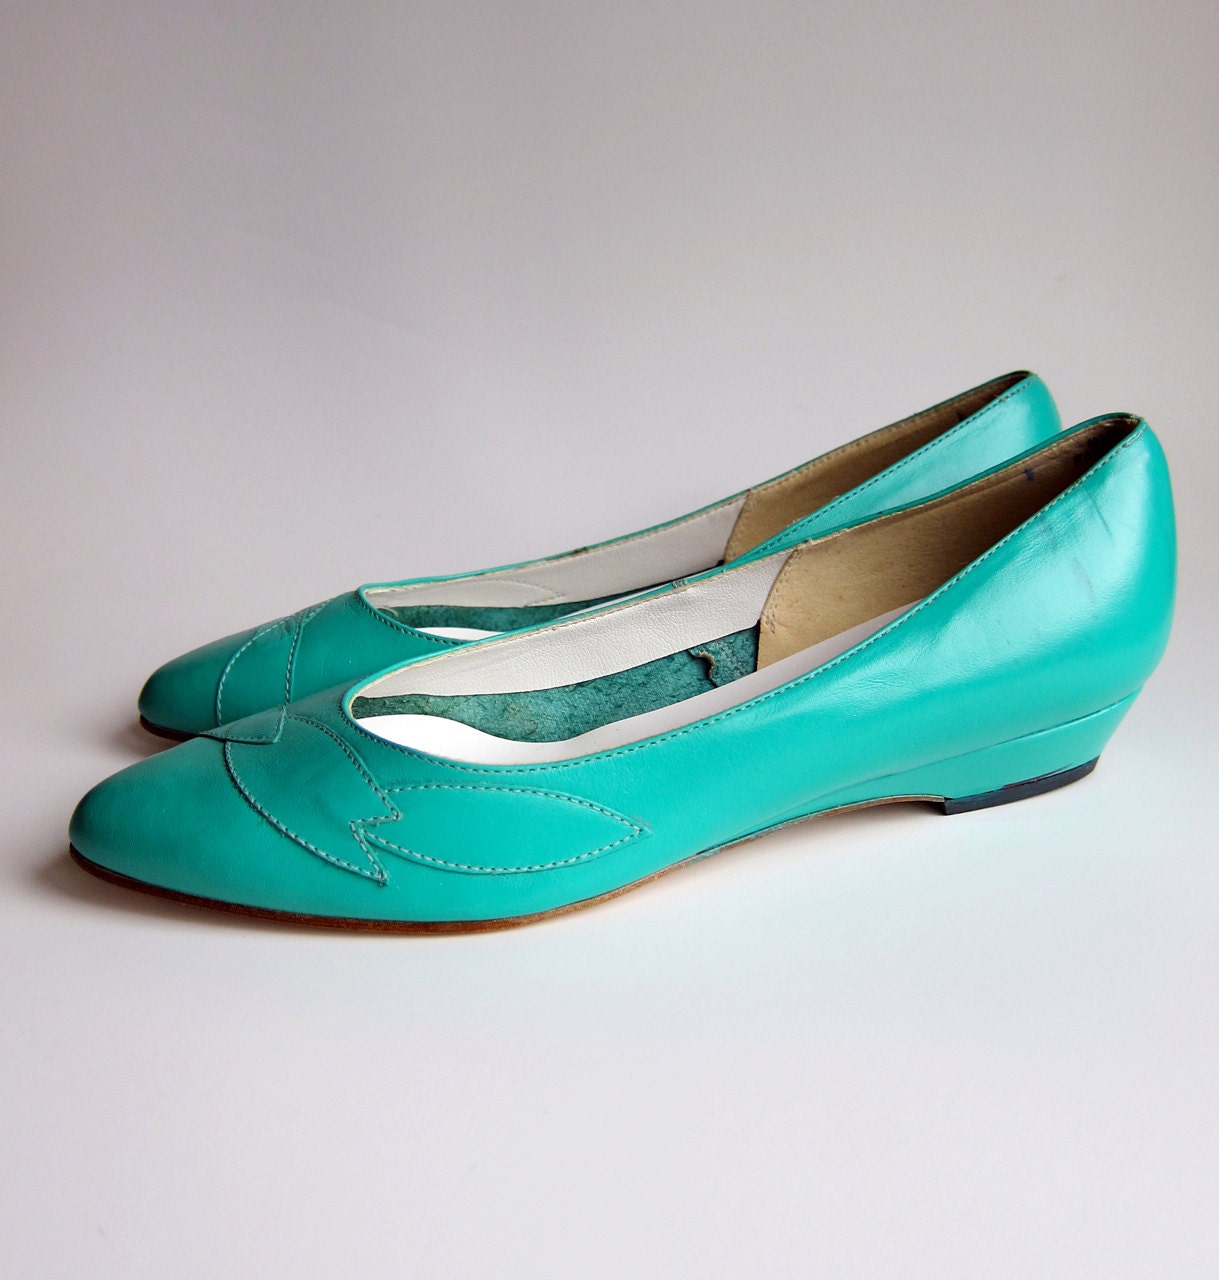 Vintage 1980s Shoes / TURQUOISE SEAFOAM GREEN Skimmers Ballet Flats Size 7 1/2 Deadstock